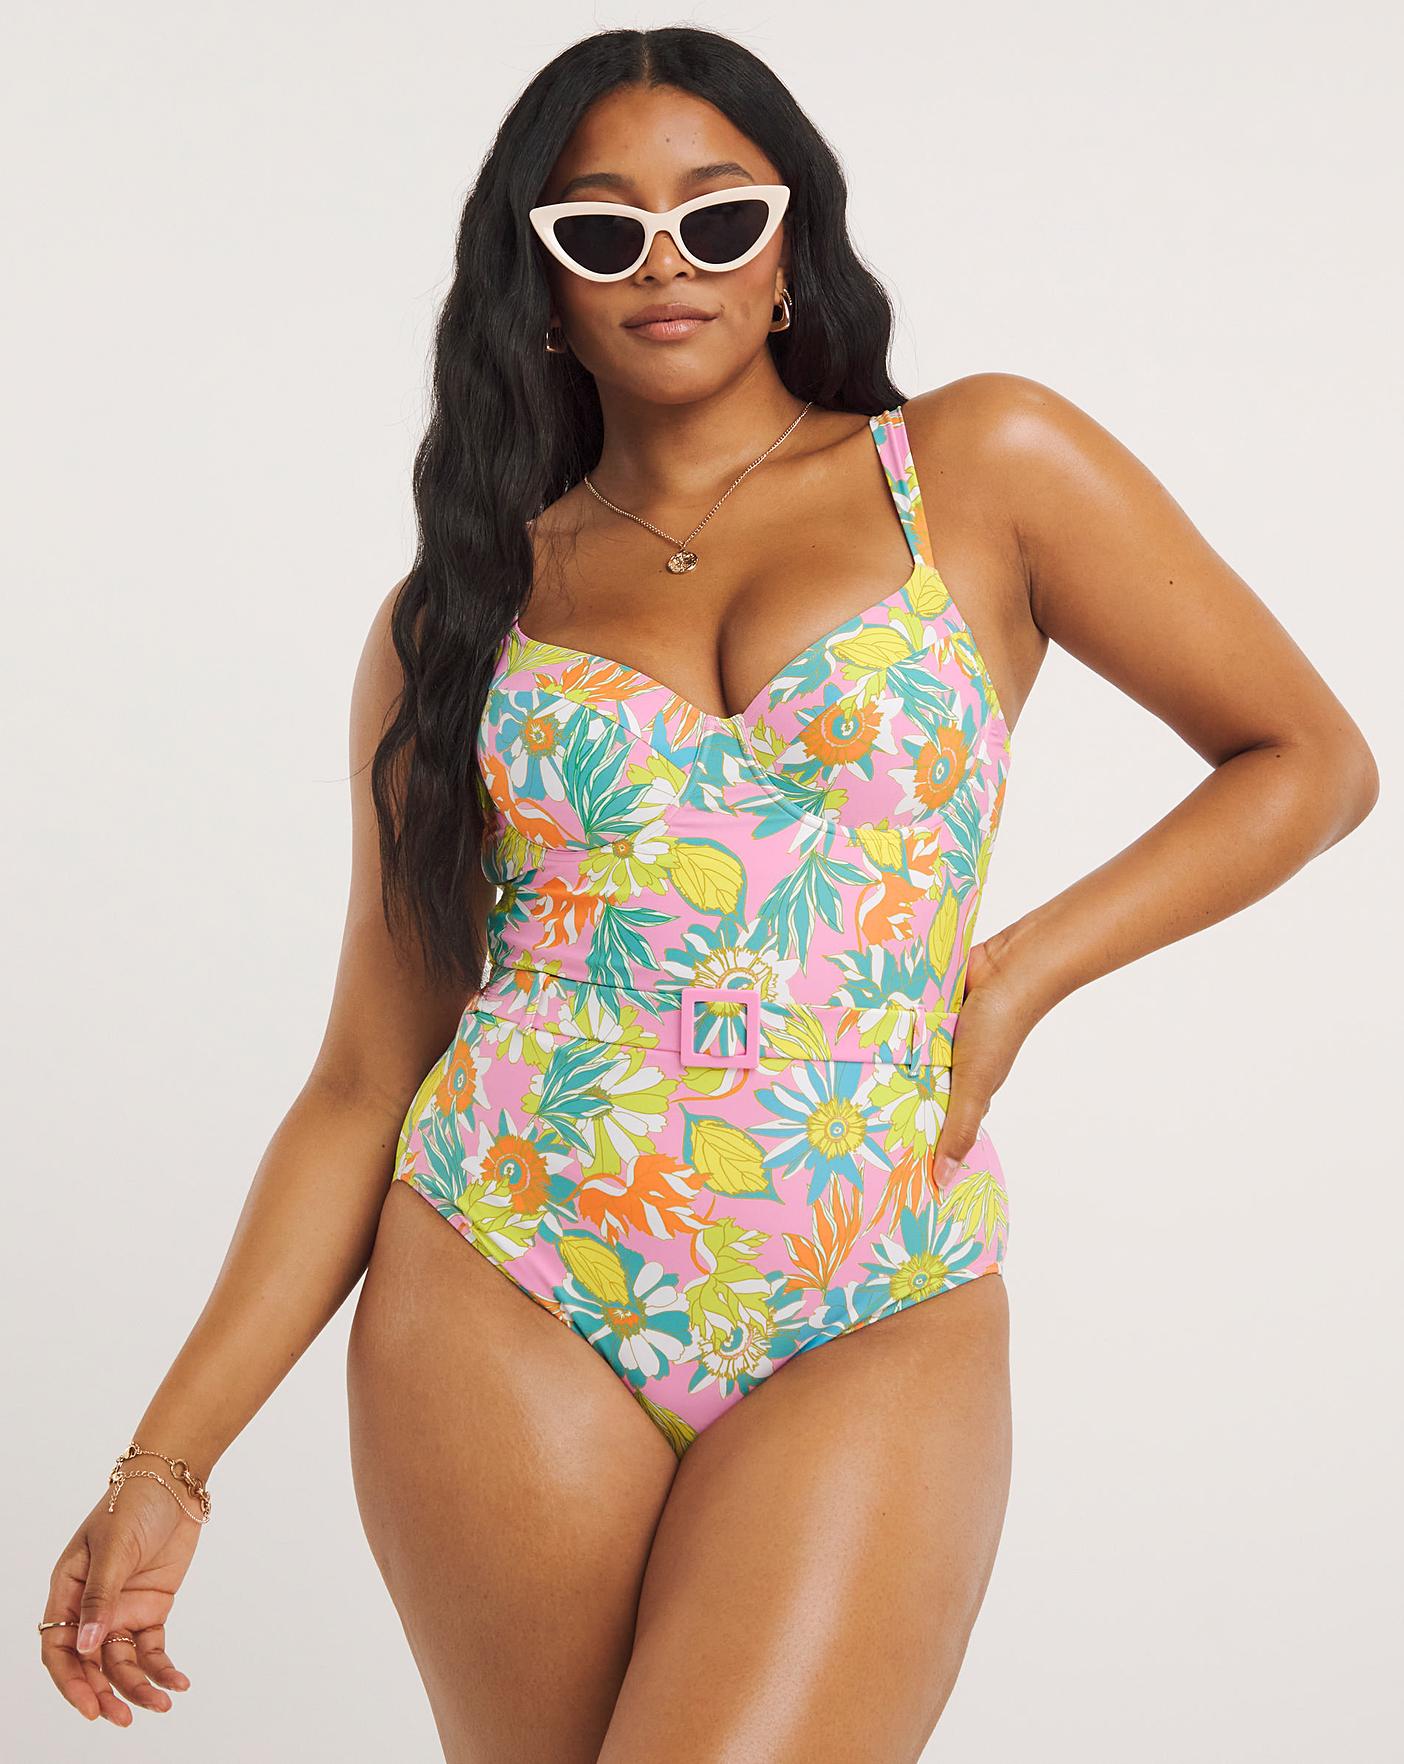 Figleaves Women's One Piece Swimsuits